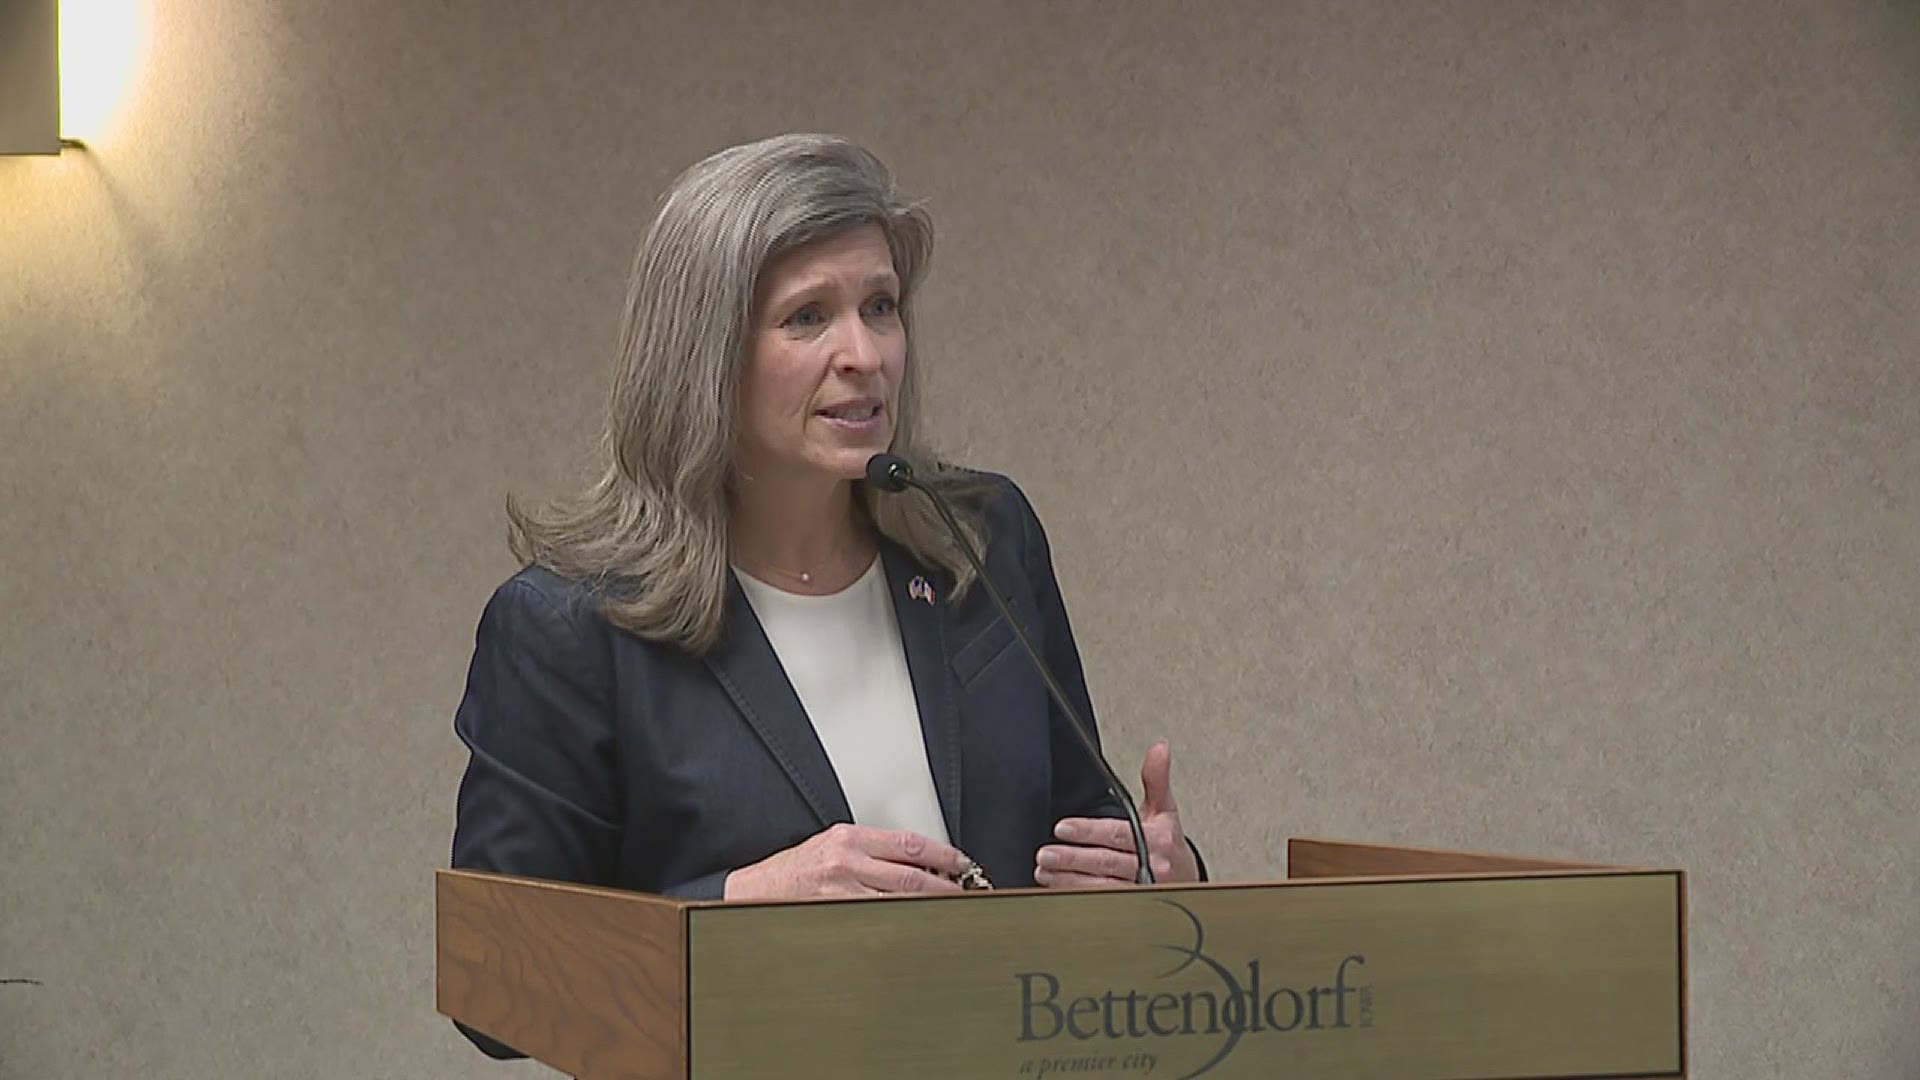 The senator spoke with media while in Bettendorf on her annual 99 county tour of Iowa.